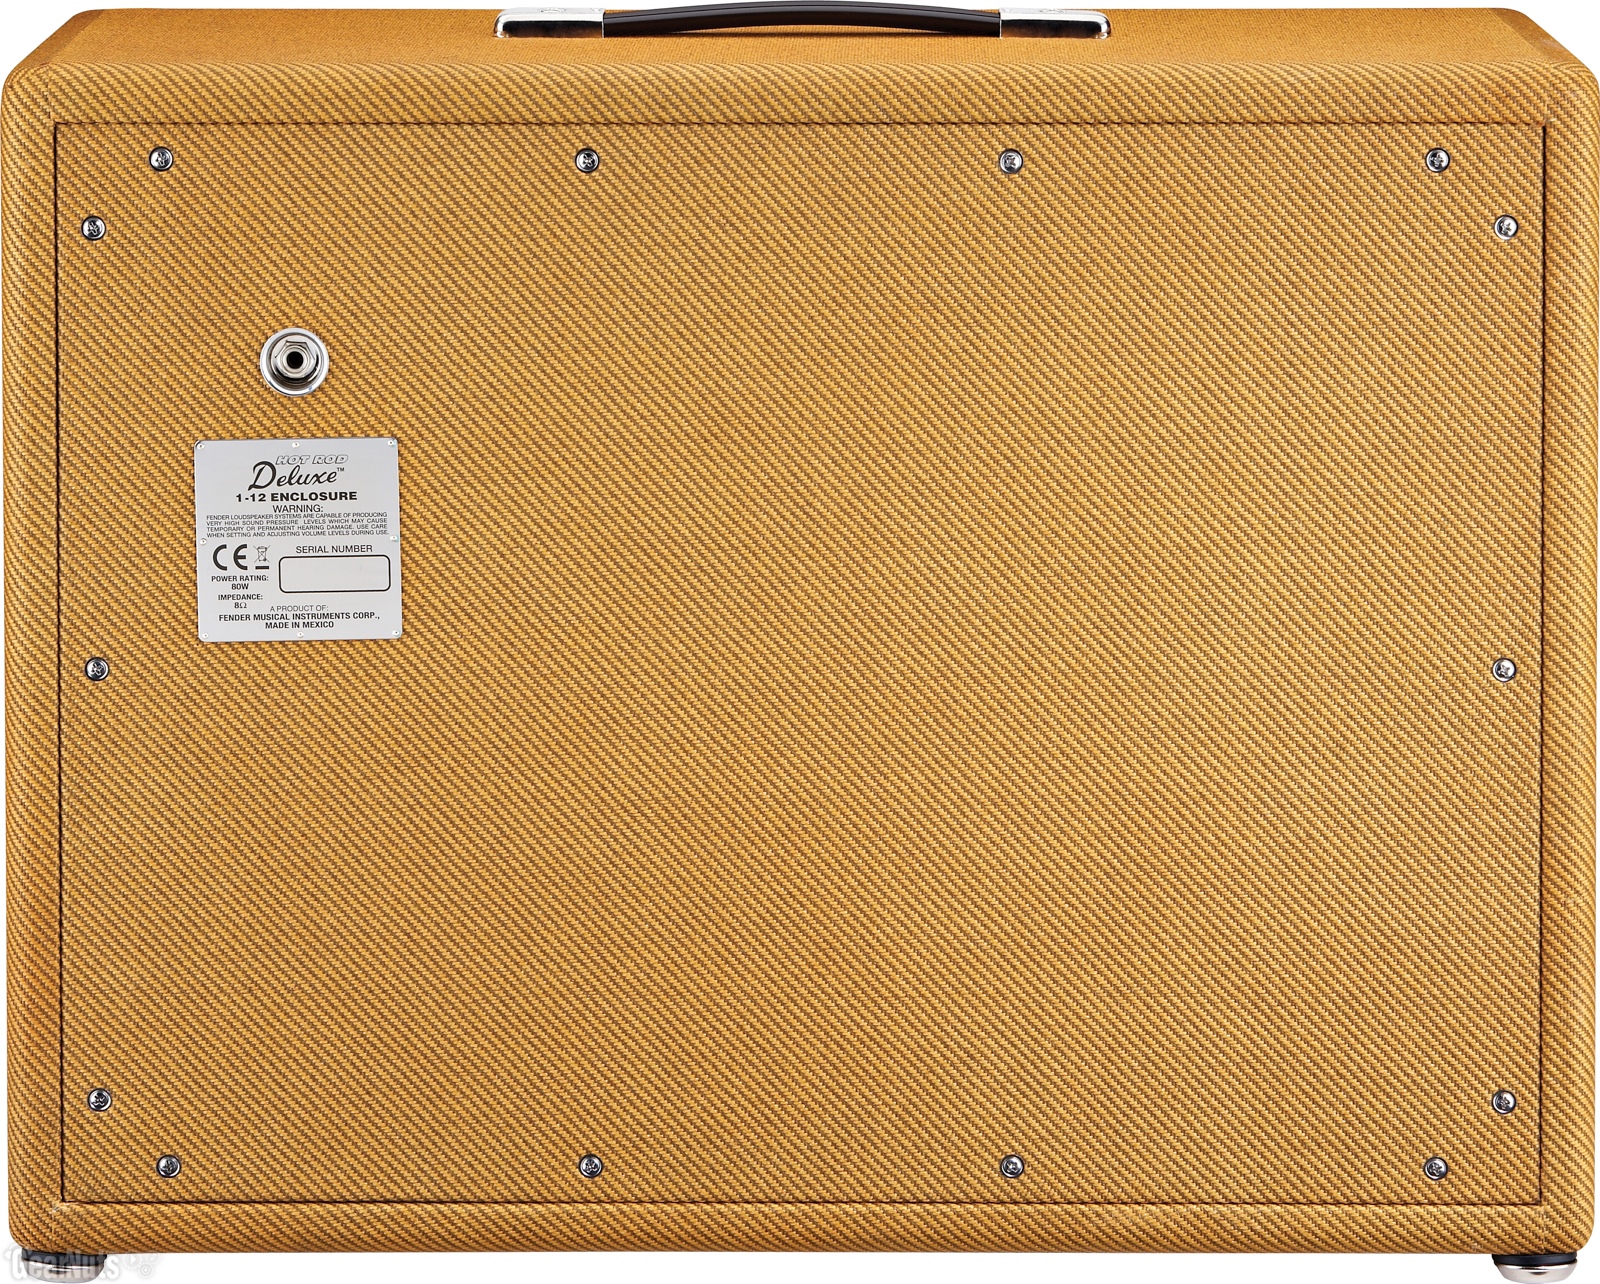 Fender Hot Rod Deluxe 112 Enclosure Lacquered Tweed Electric